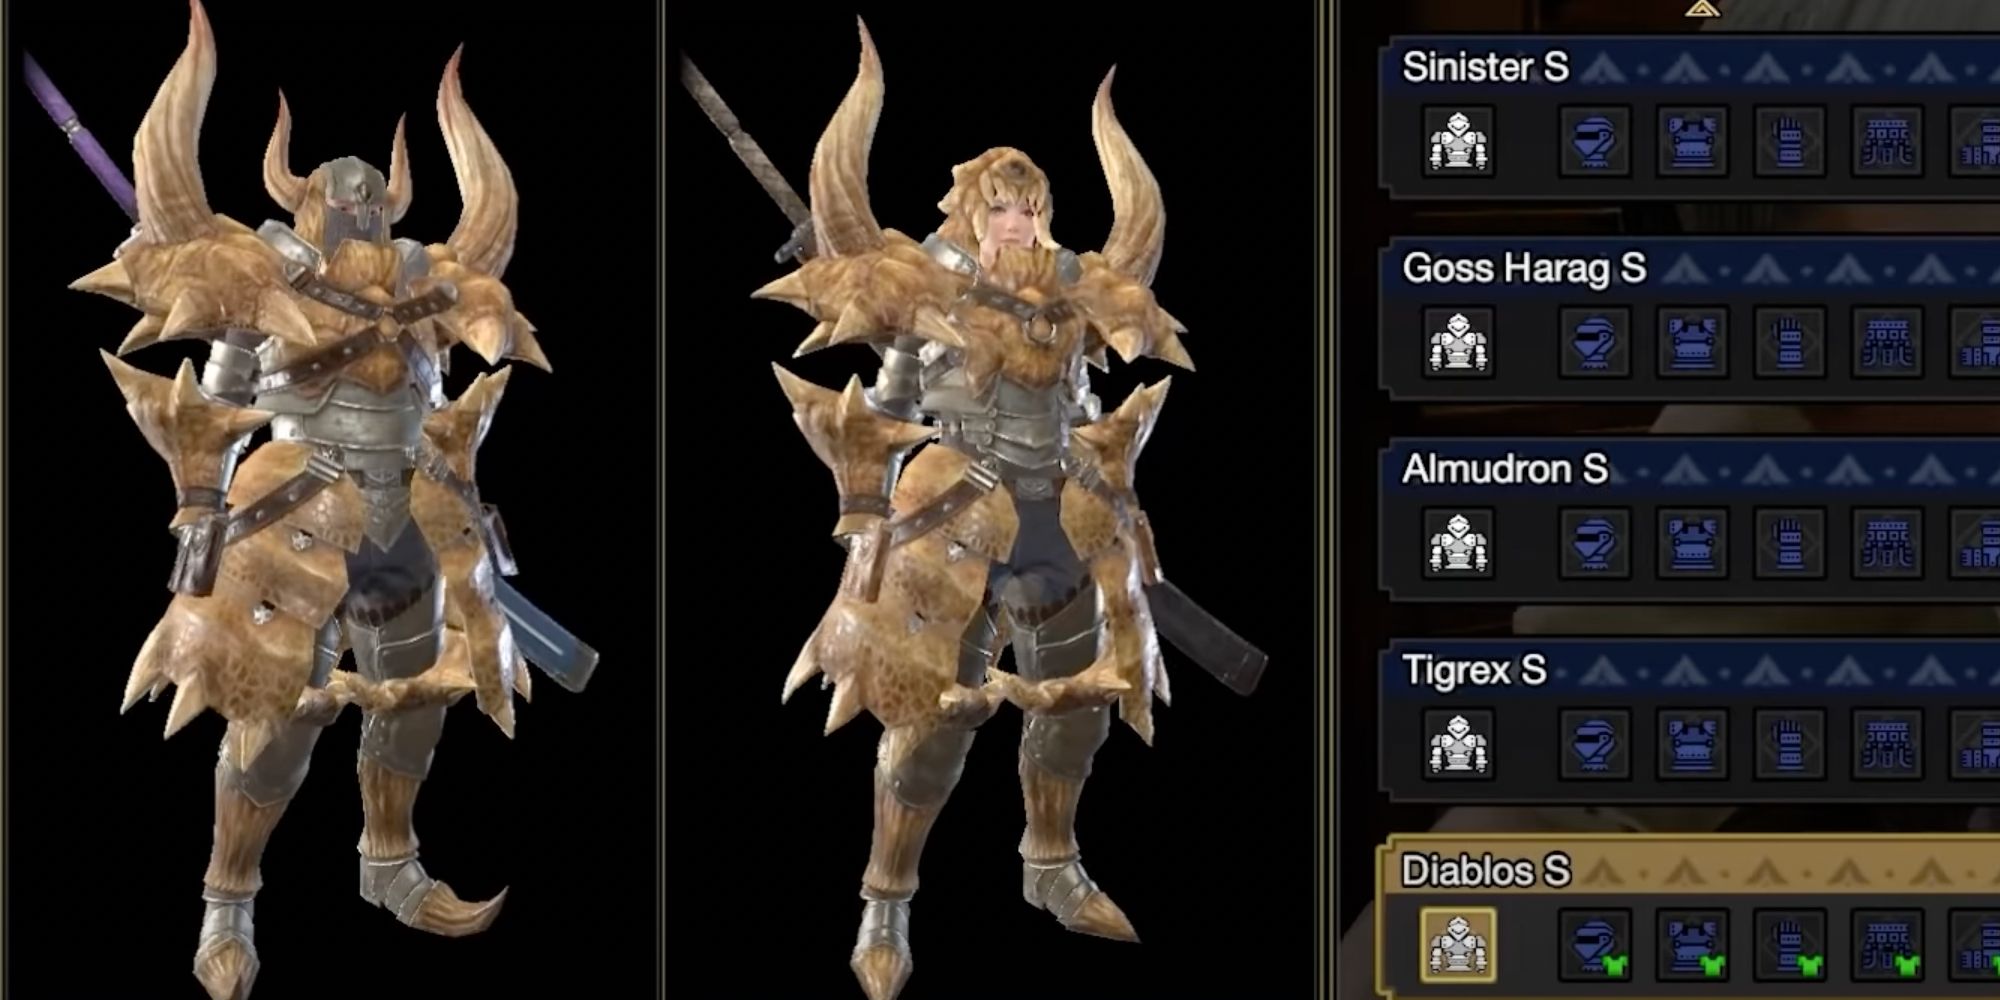 Armor selection screen showing both gendered Hunters in Diablos armor